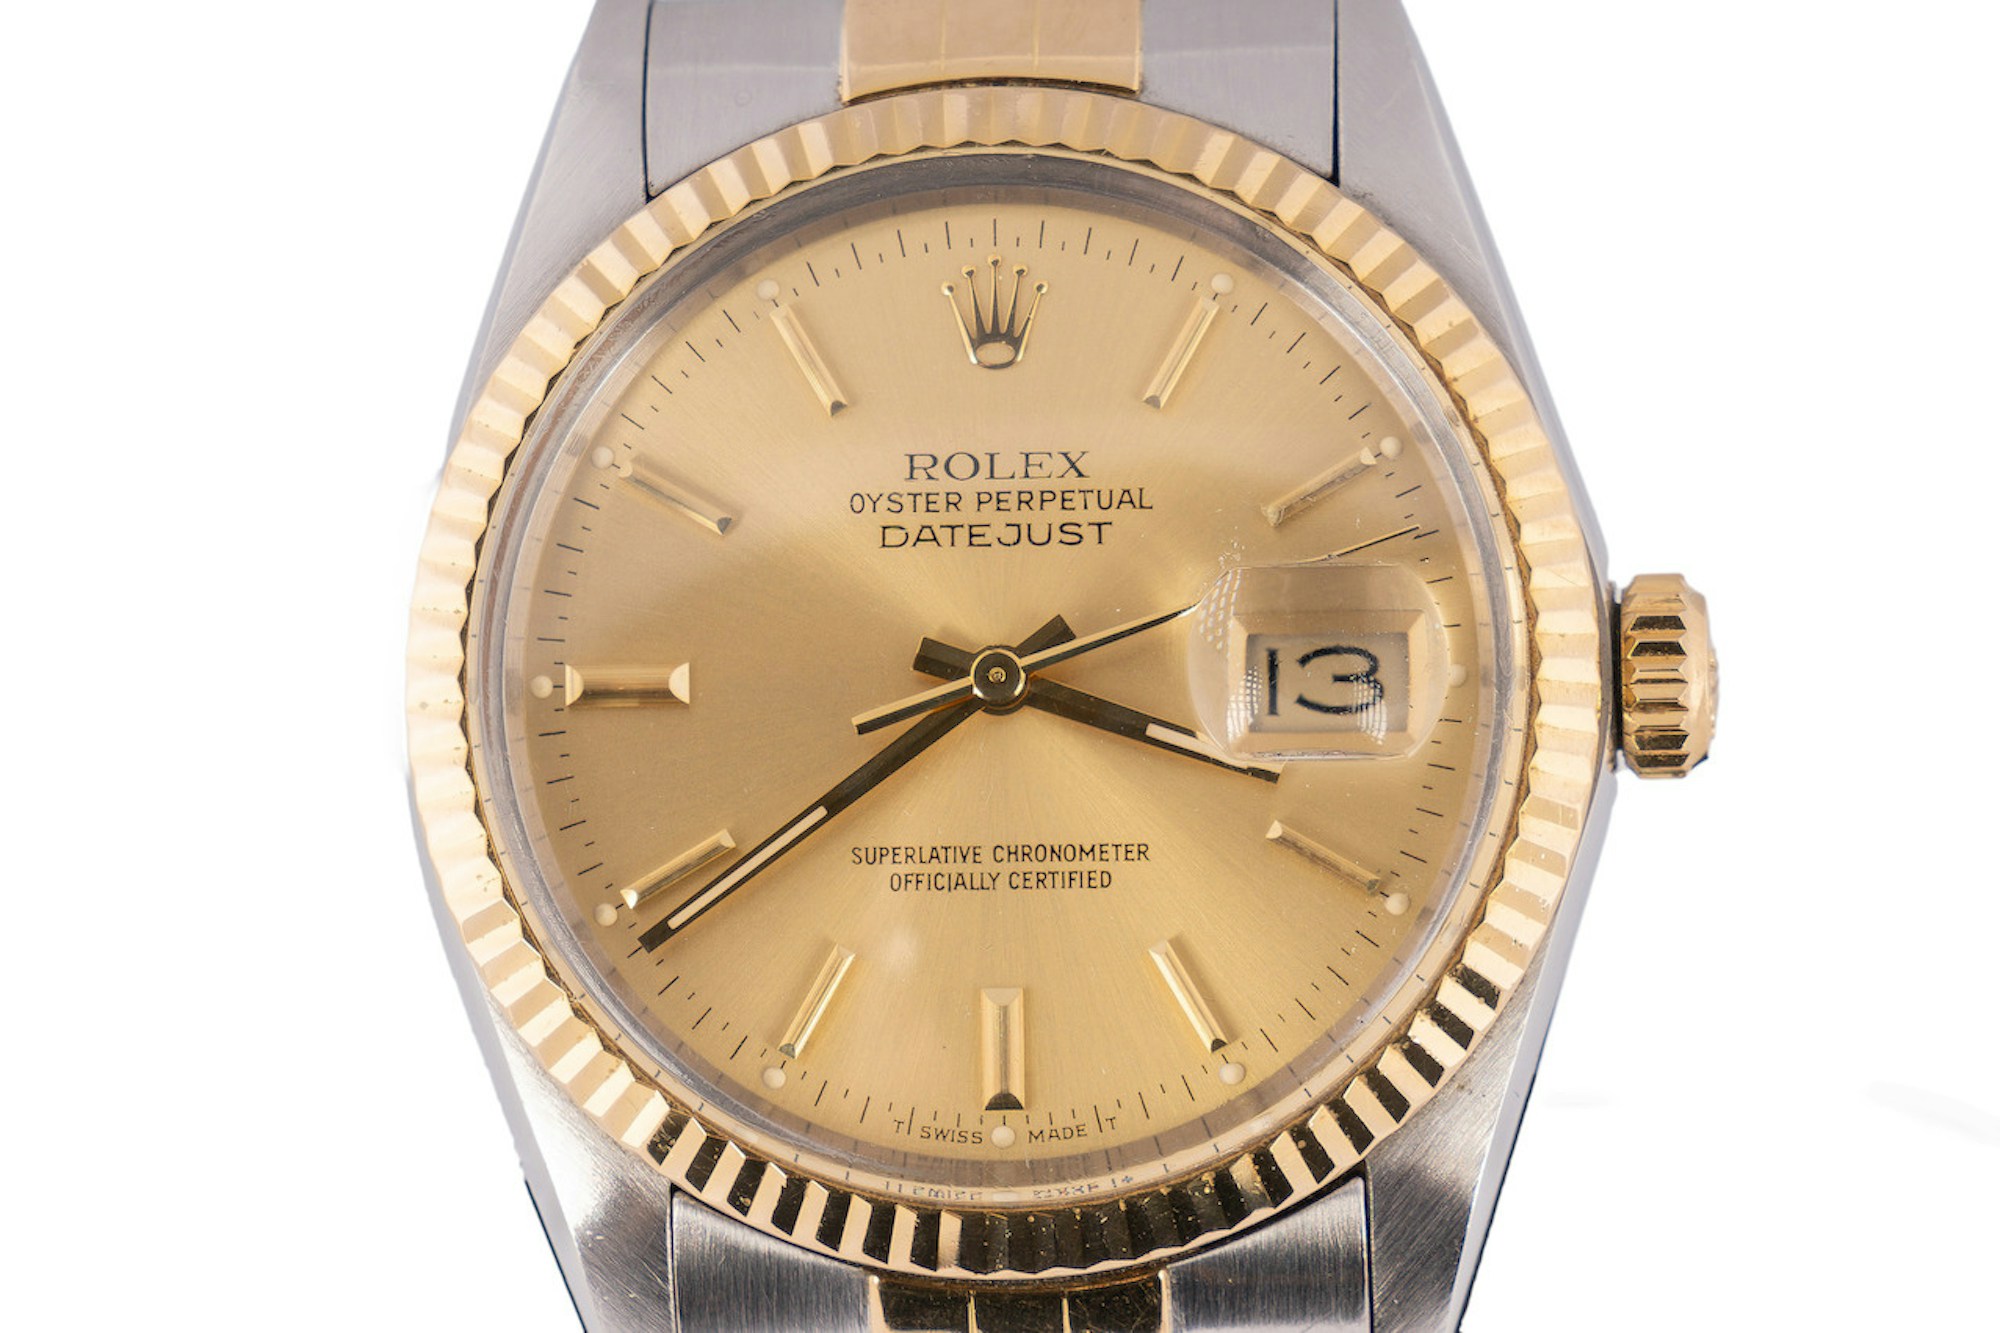 1986 DATEJUST for sale by auction in Harrogate, North Yorkshire, United Kingdom